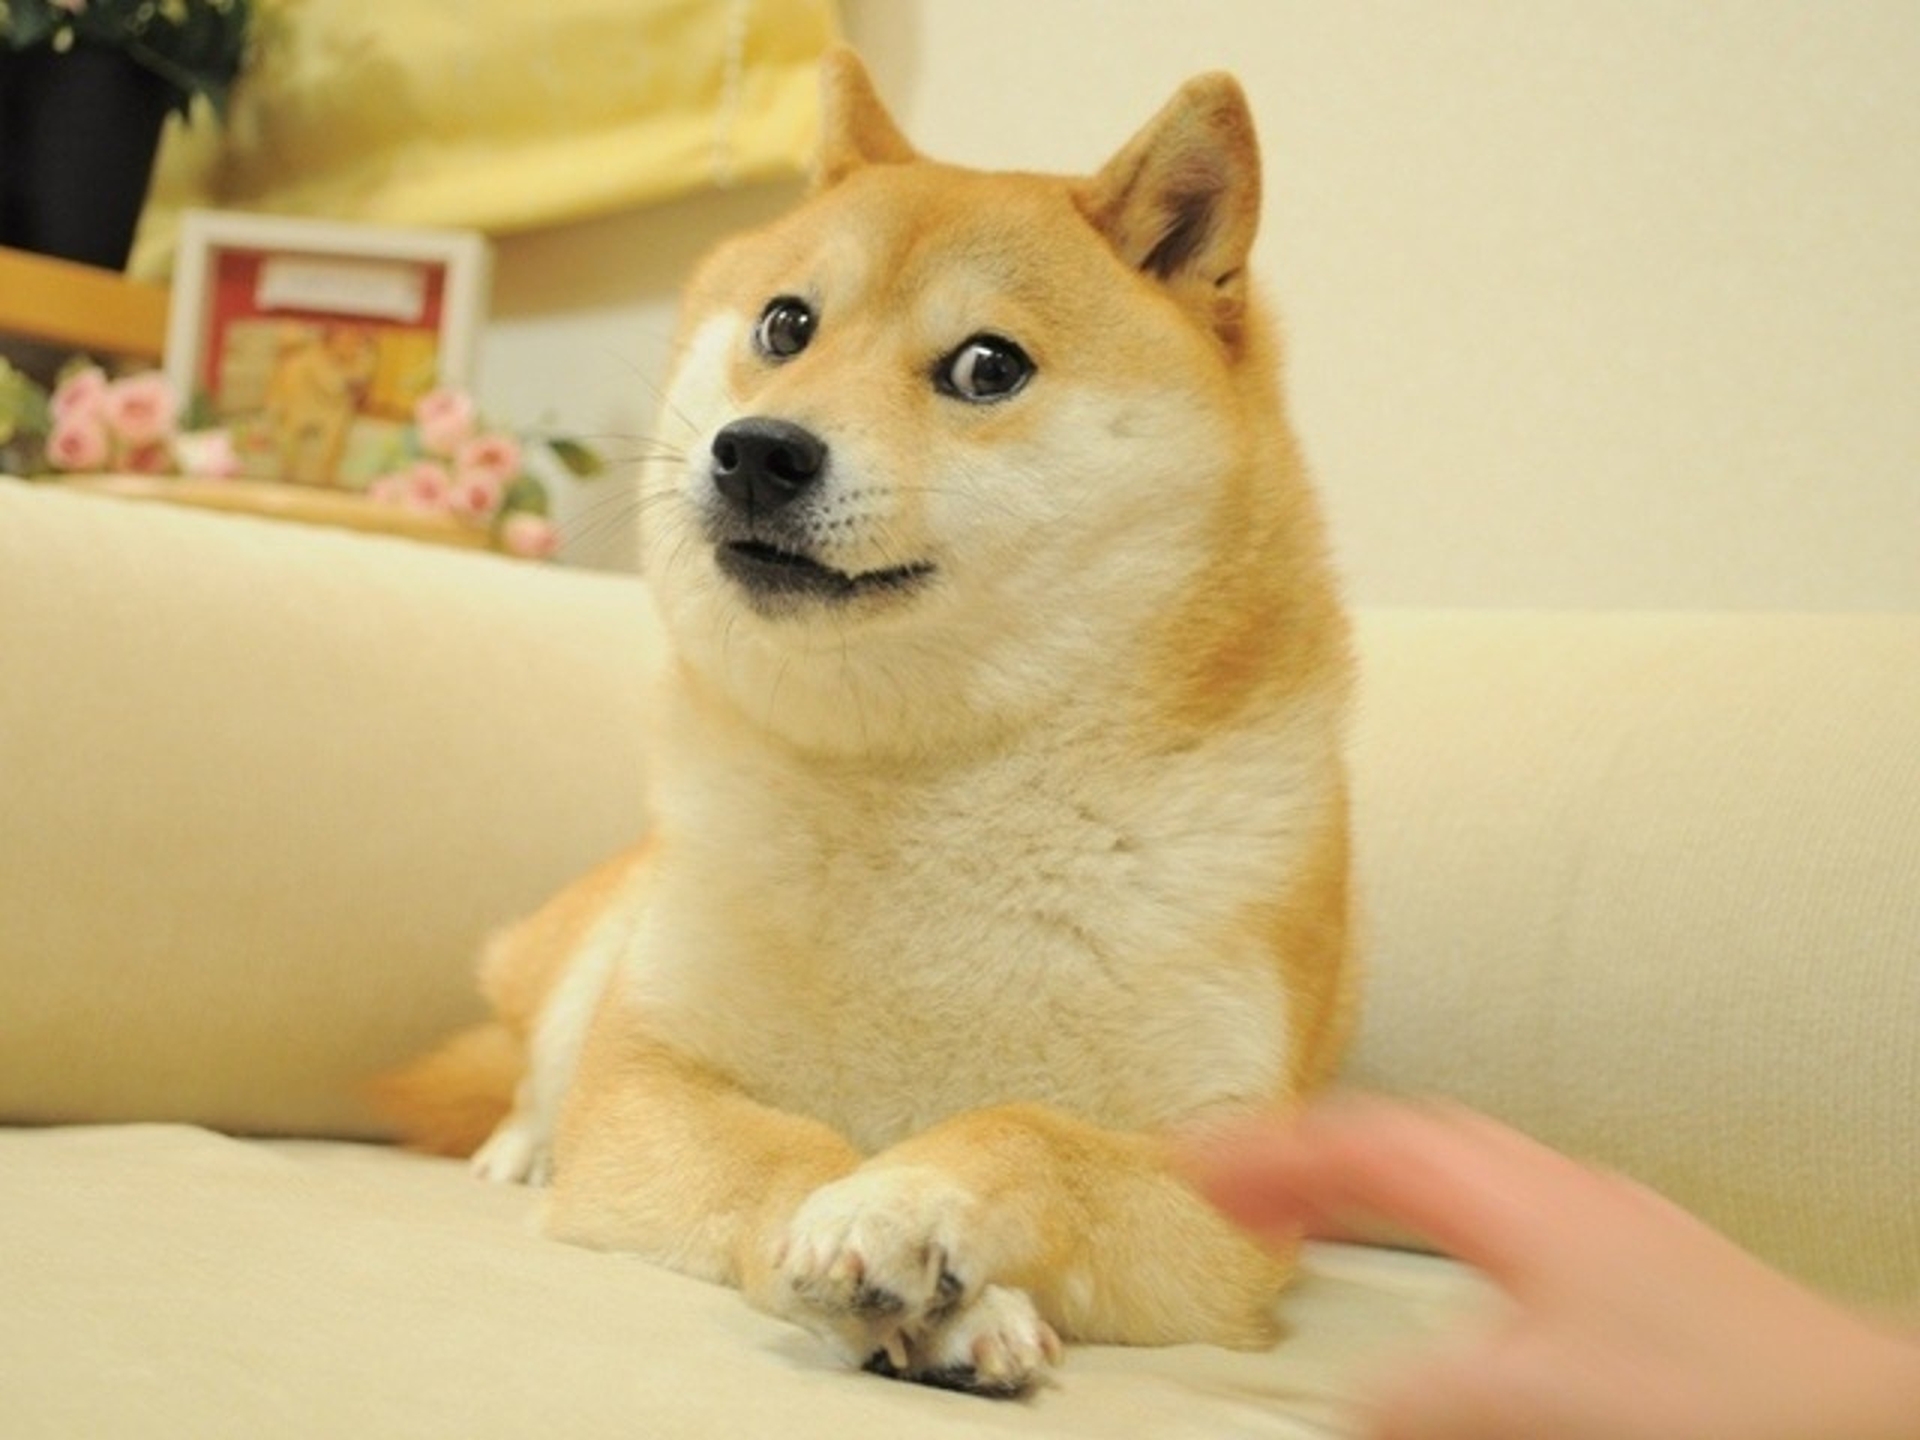 This is a picture of a Doge